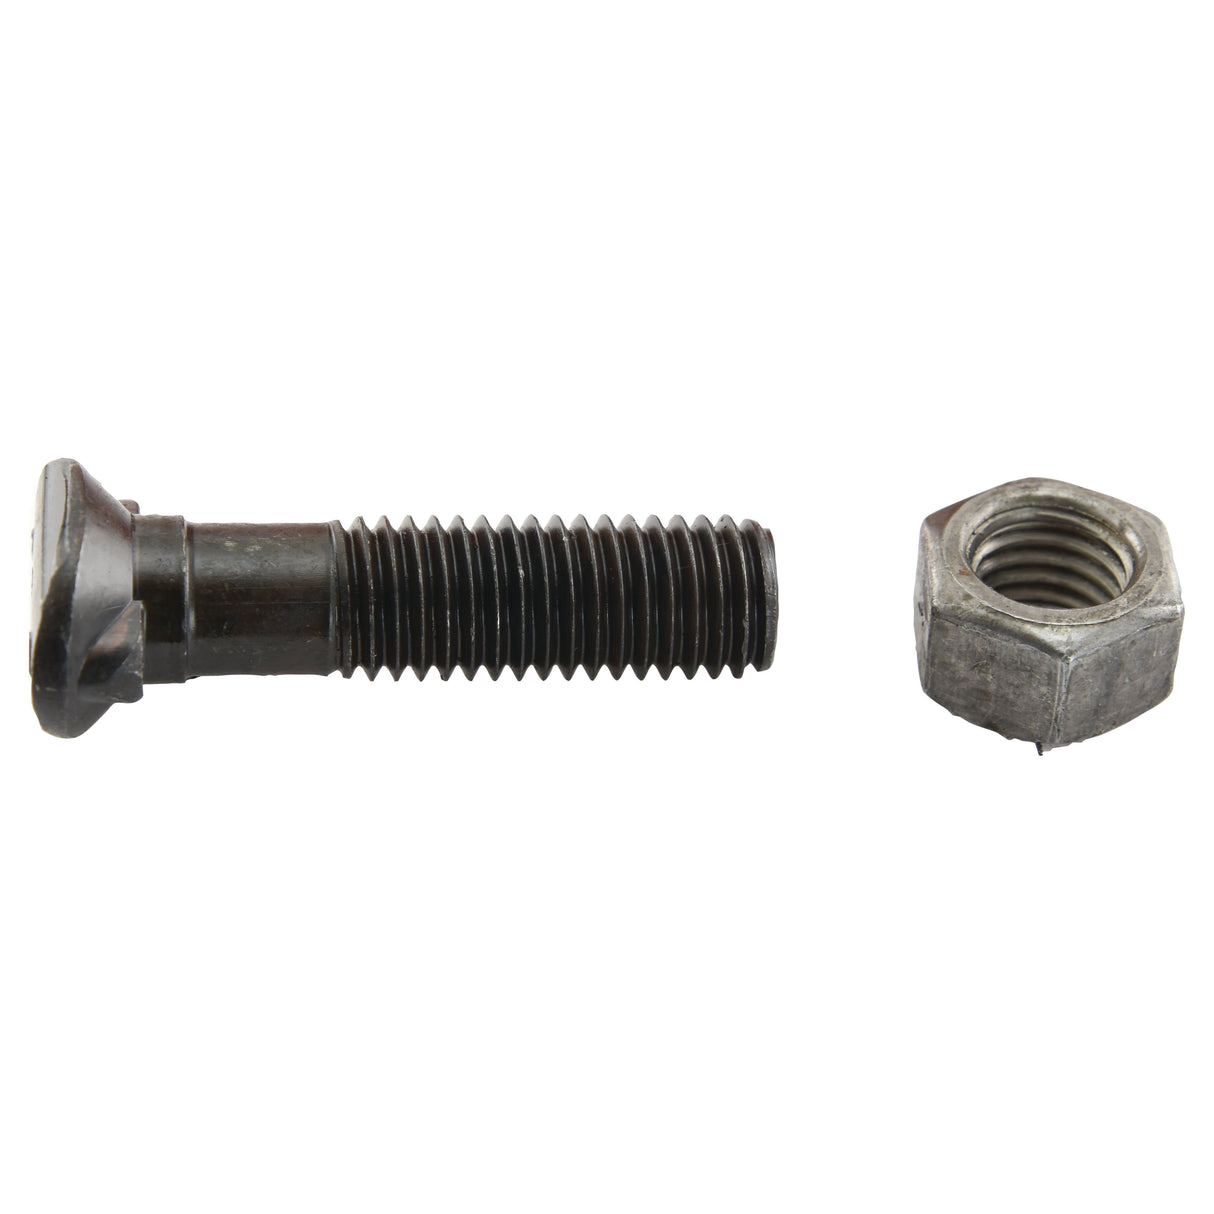 Oval Head Double Nib Bolt With Nut (TO2E) - M12 x 50mm, Tensile strength 10.9 (25 pcs. Box)
 - S.72330 - Farming Parts